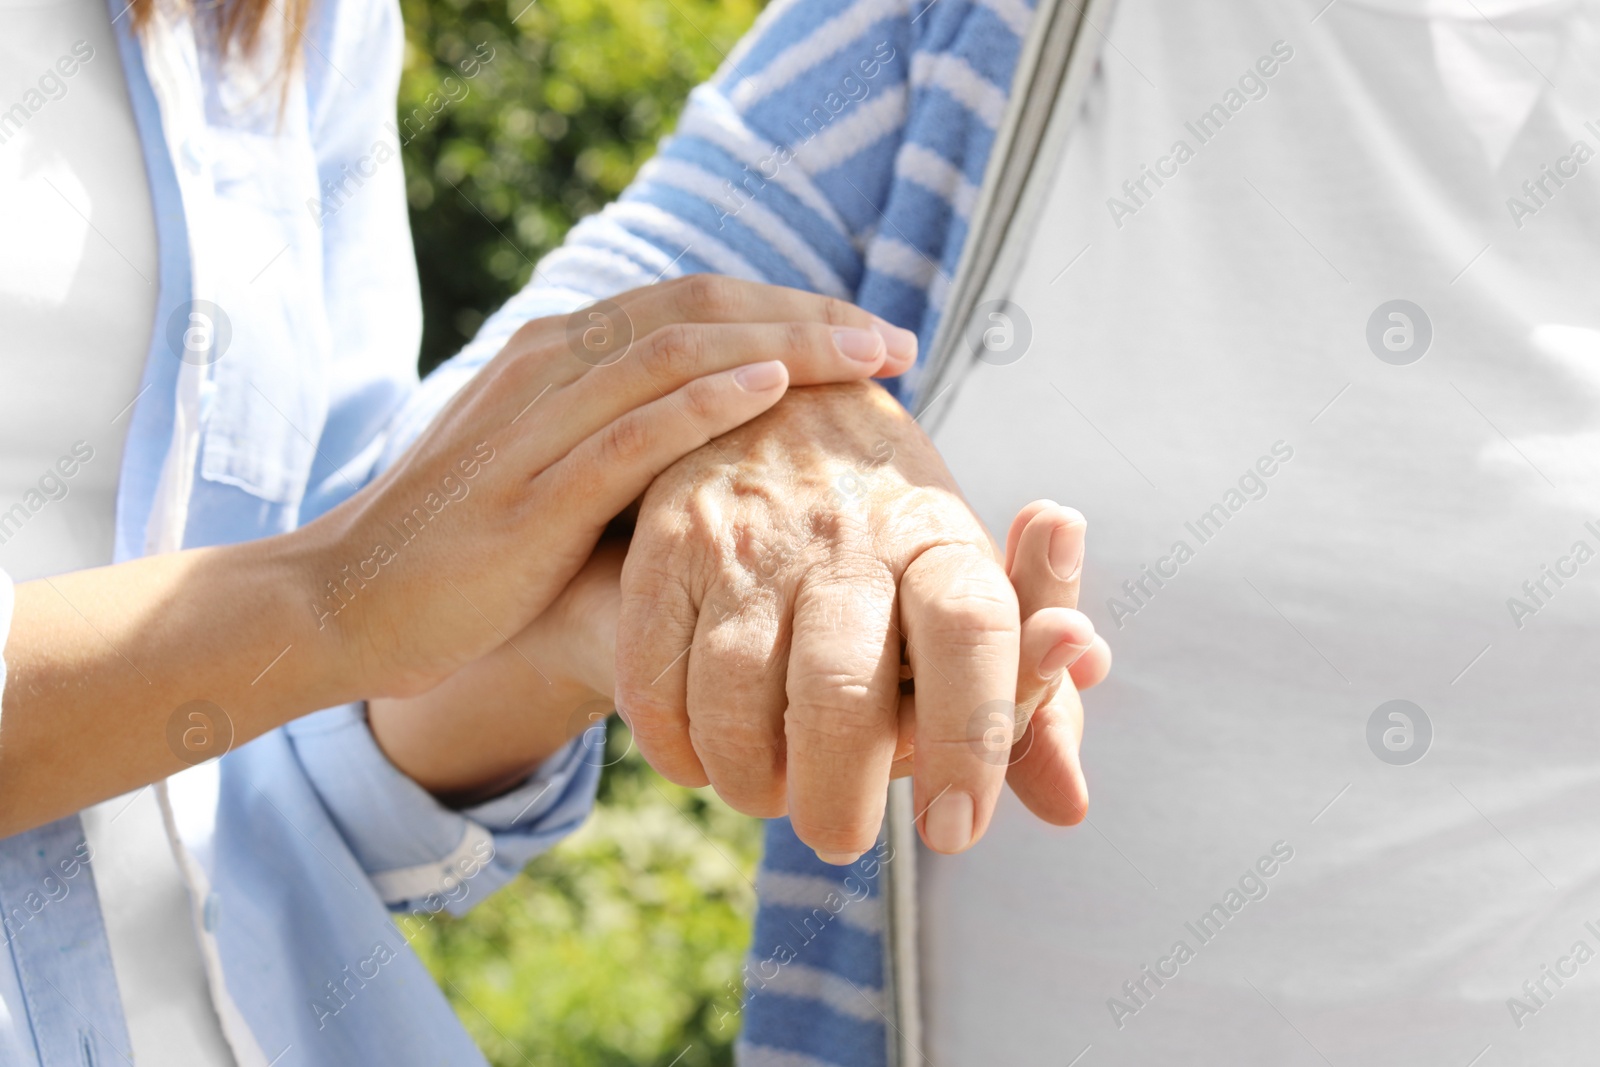 Photo of Helping hands on blurred background, closeup. Elderly care concept